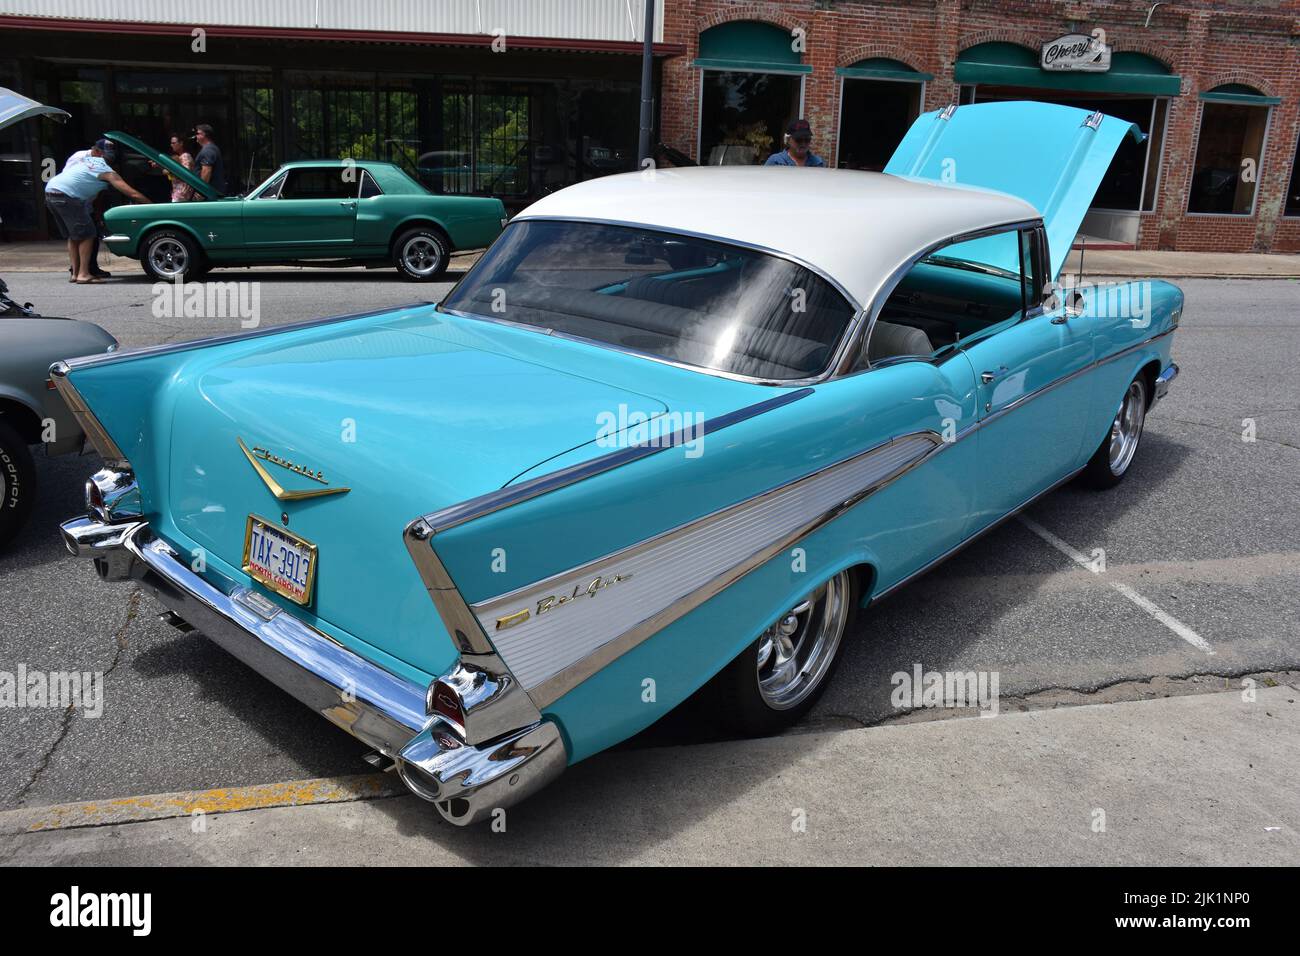 A 1957 Chevrolet Belair on display at a car show. Stock Photo